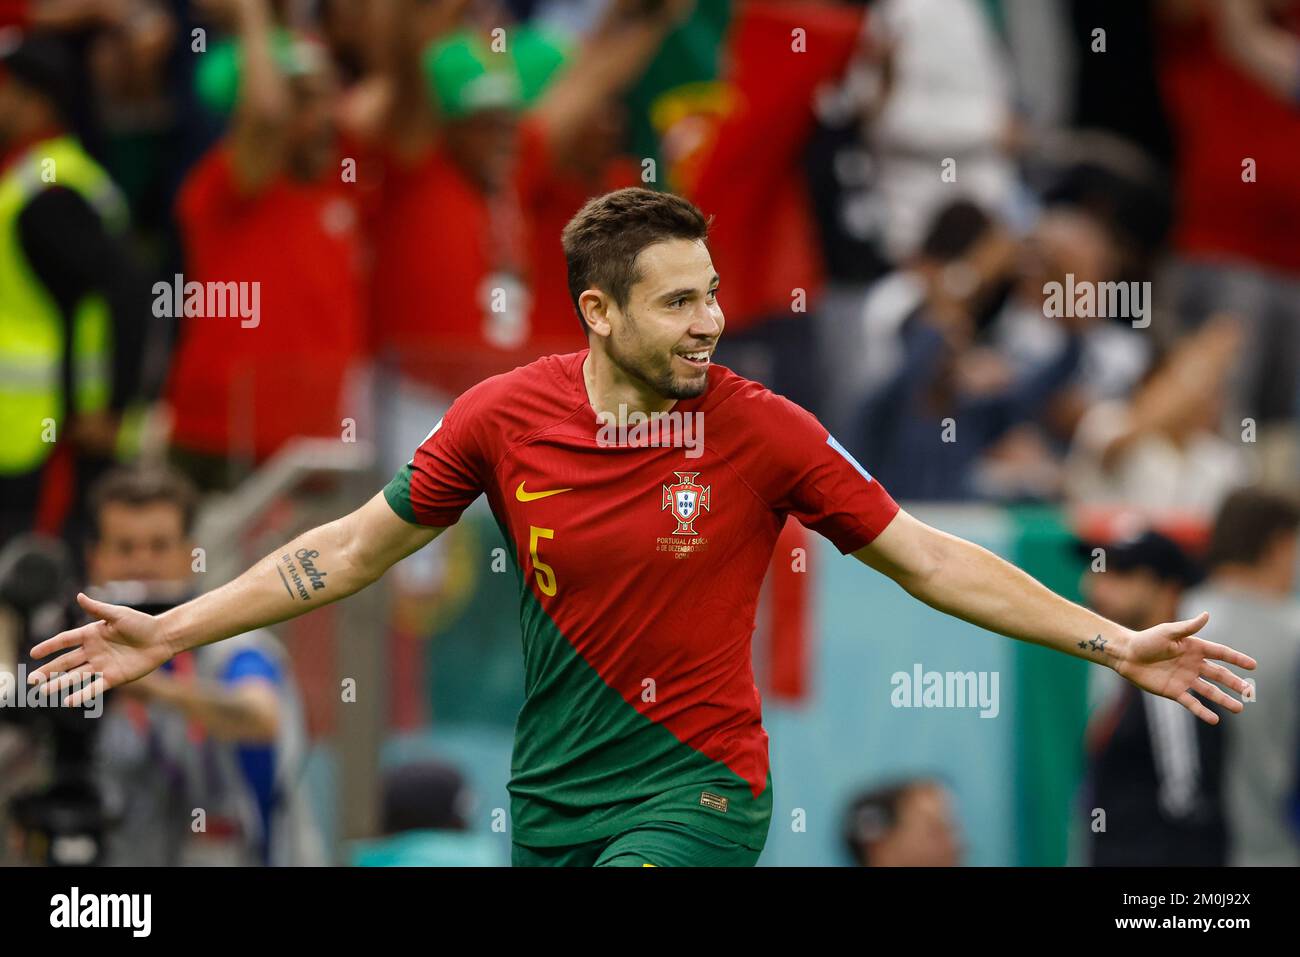 Lusail, Catar. 06th Dec, 2022. RAPHAEL GUERREIRO of Portugal celebrates his goal during a match between Portugal vs Su? a, valid for the Round of 16 of the World Cup, held at the Lusail National Stadium in Lusail, Qatar. Credit: Rodolfo Buhrer/La Imagem/FotoArena/Alamy Live News Stock Photo